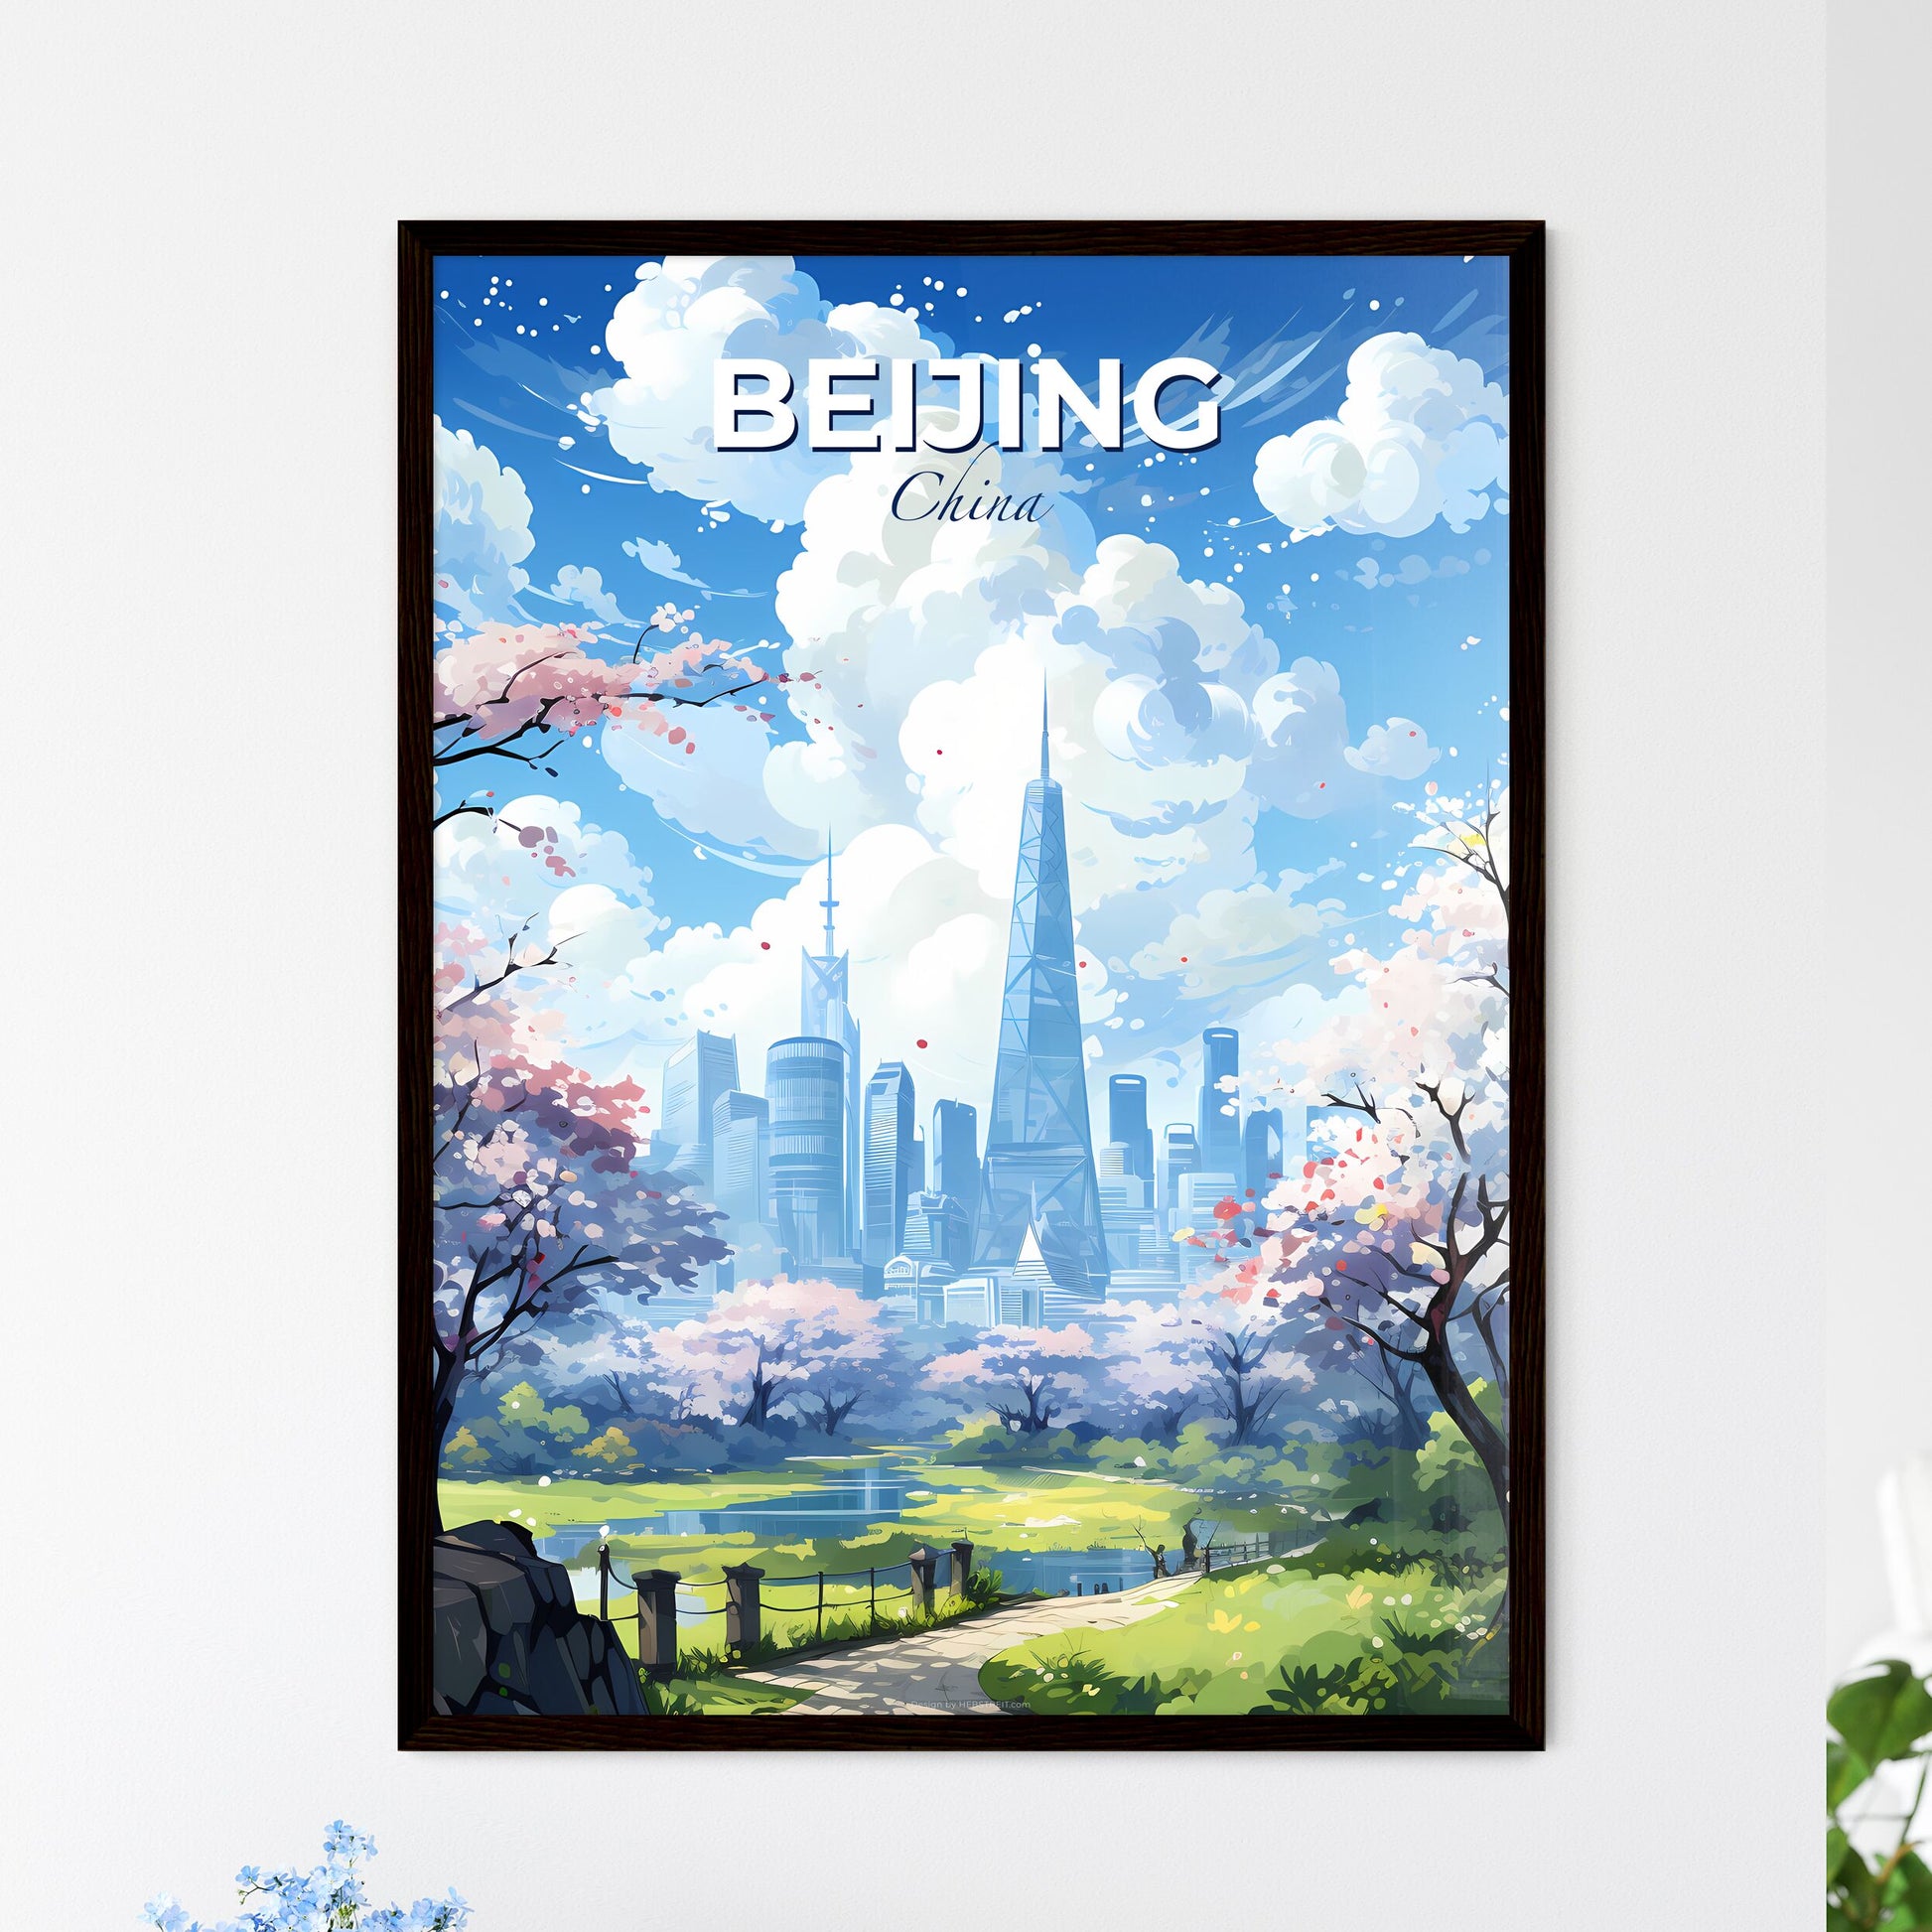 Beijing China Skyline - A City Landscape With Trees And A Lake - Customizable Travel Gift Default Title